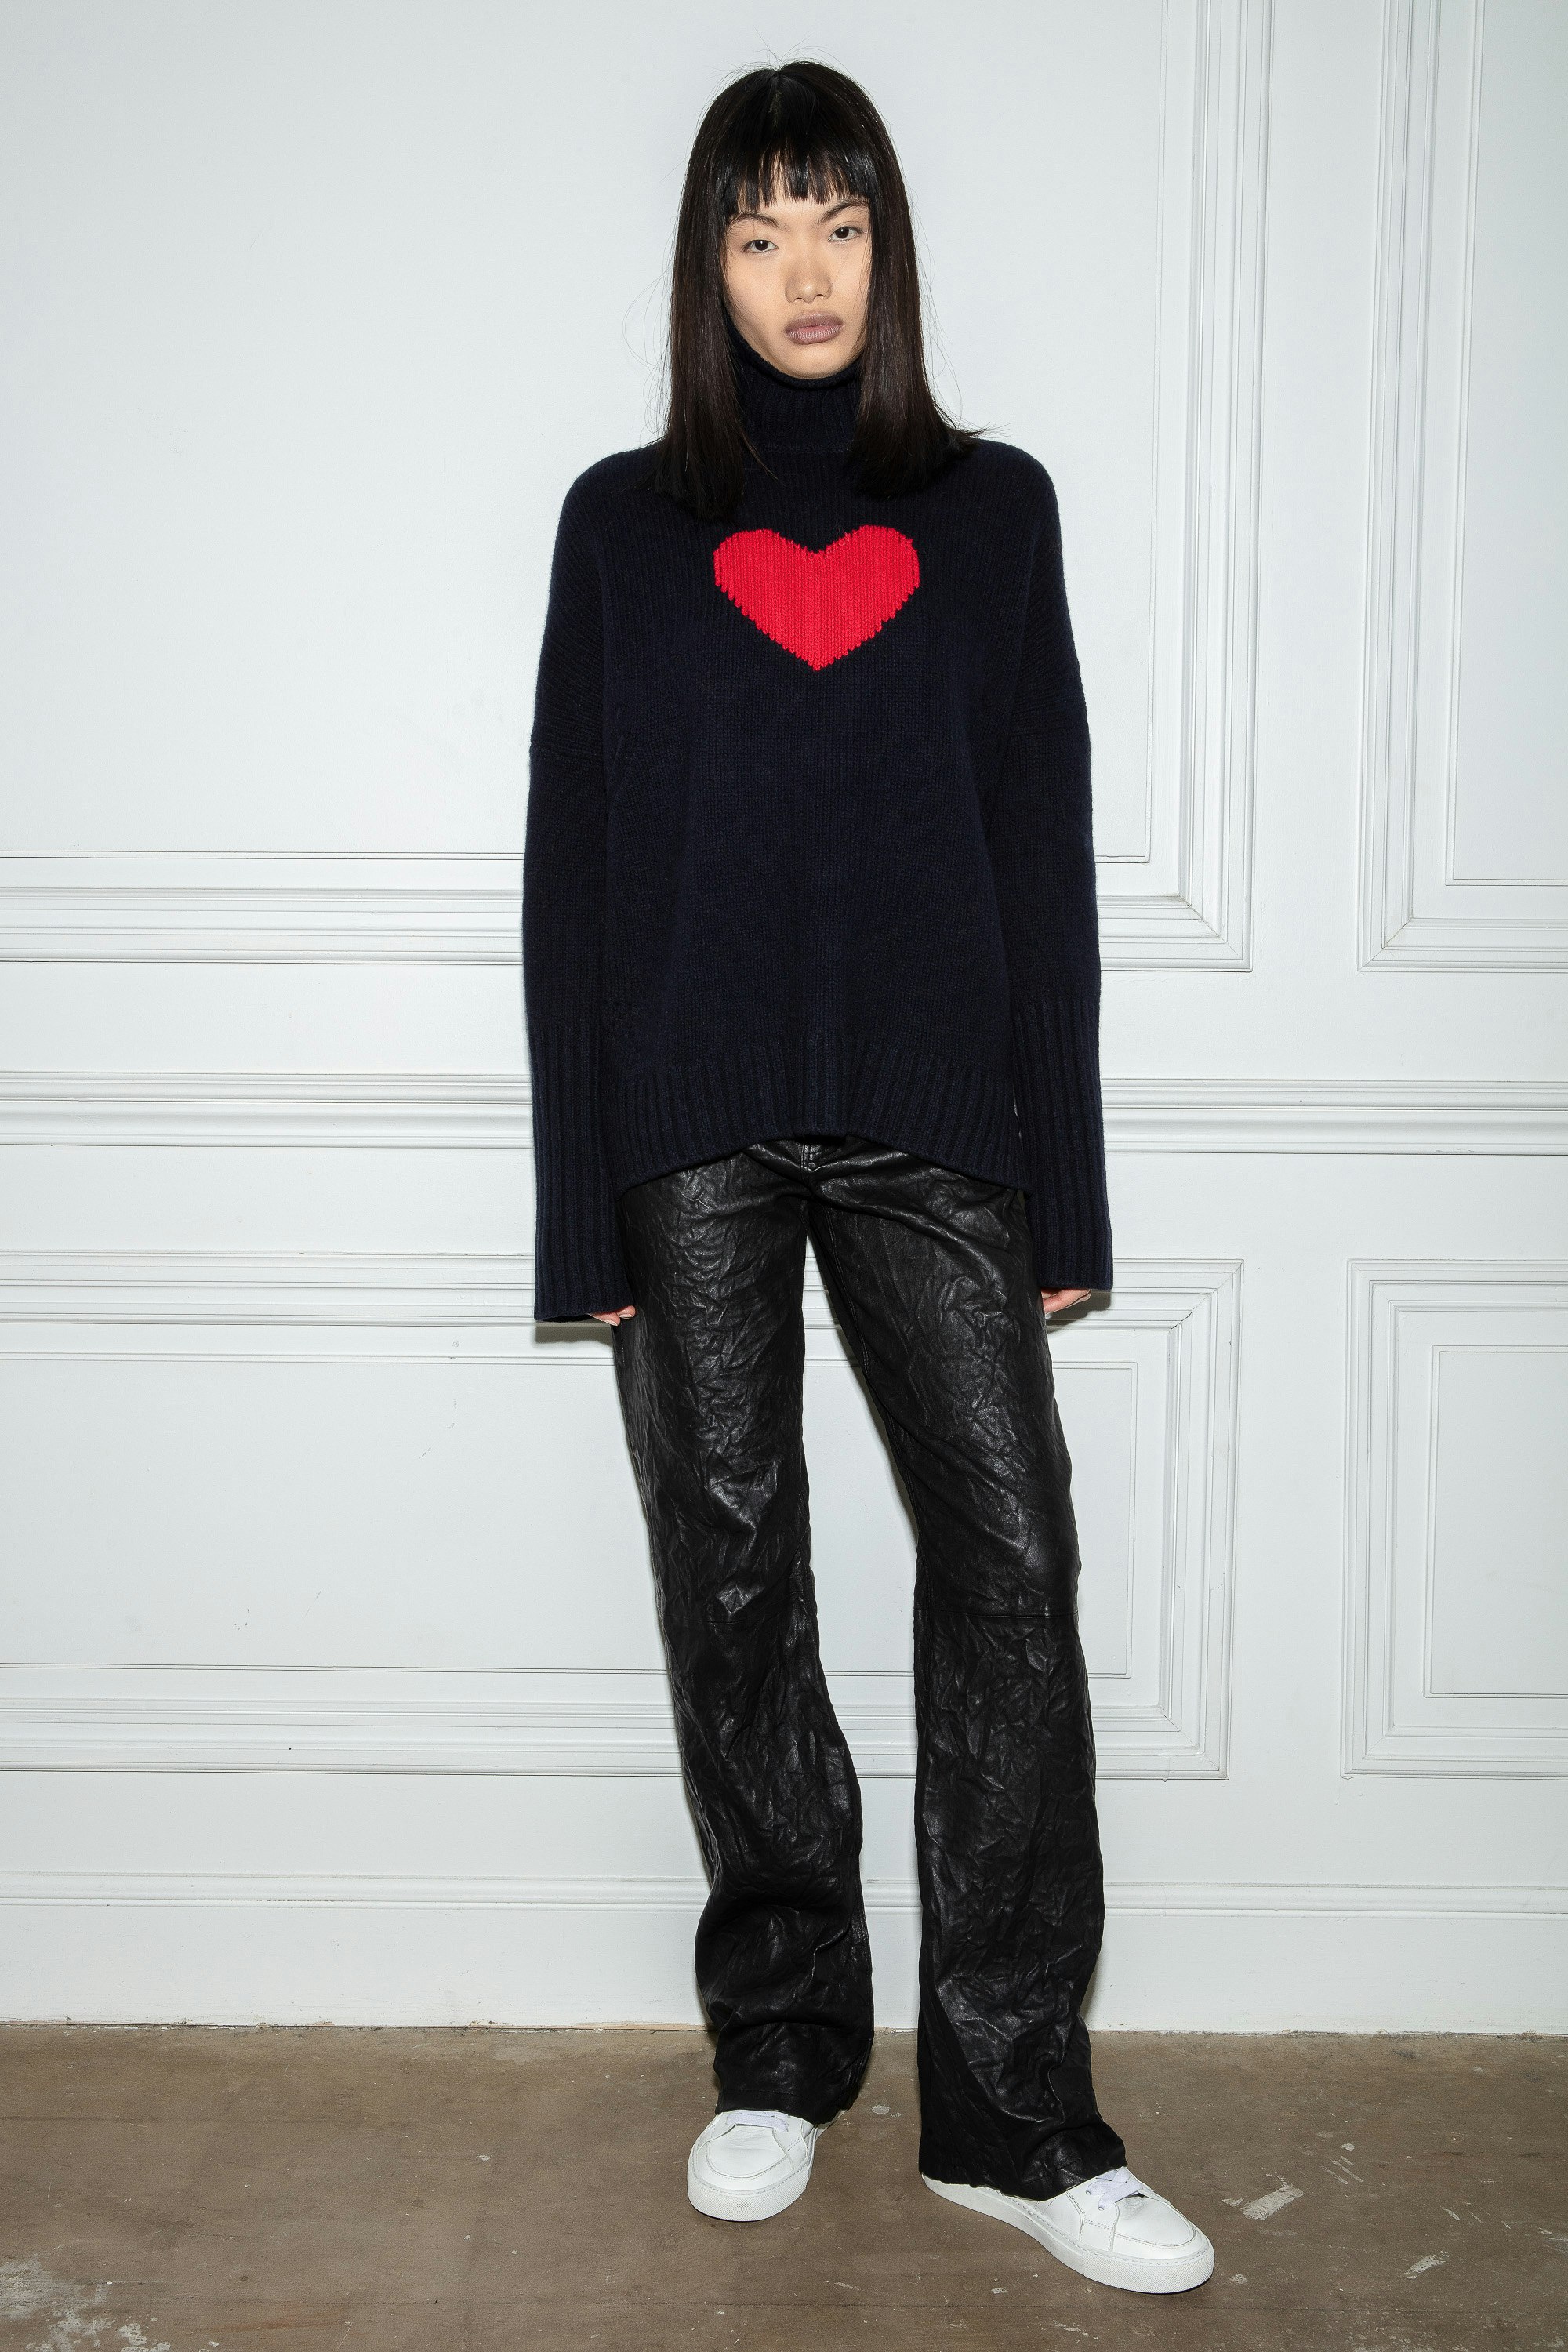 Alma ニット Women’s navy blue merino knit jumper with contrasting heart and high collar